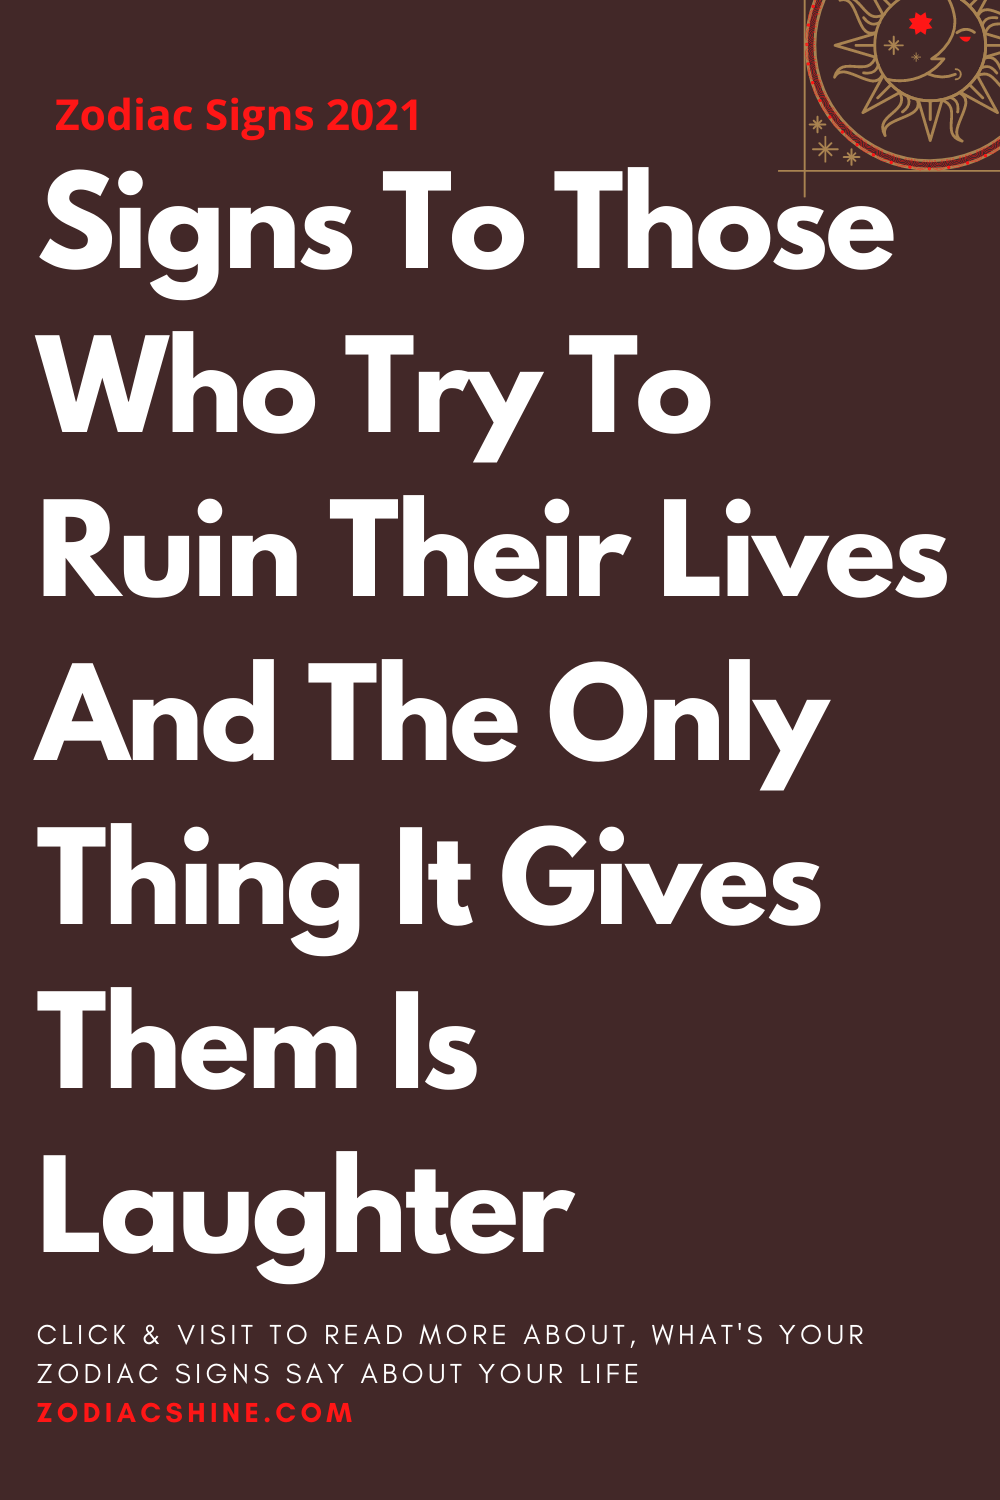 Signs To Those Who Try To Ruin Their Lives And The Only Thing It Gives Them Is Laughter